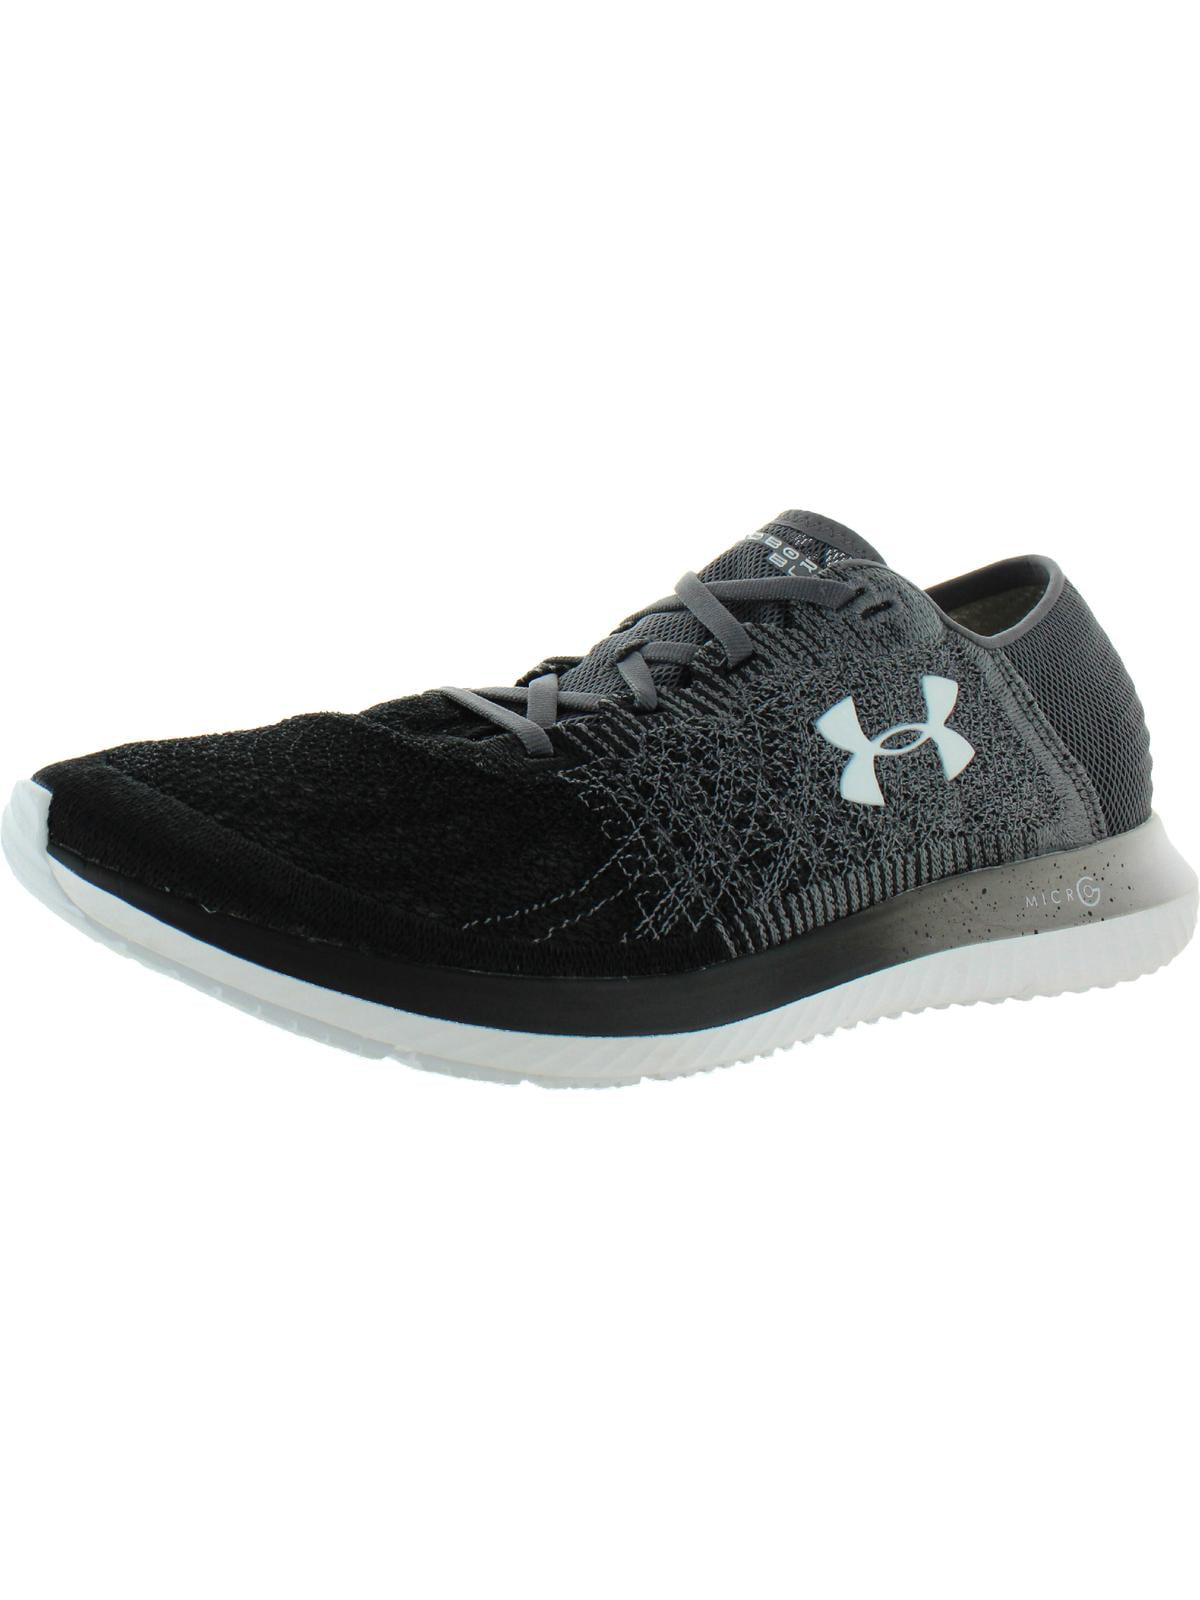 Under Armour Womens Threadborne Blur Running Shoes Trainers Sneakers Black Grey 